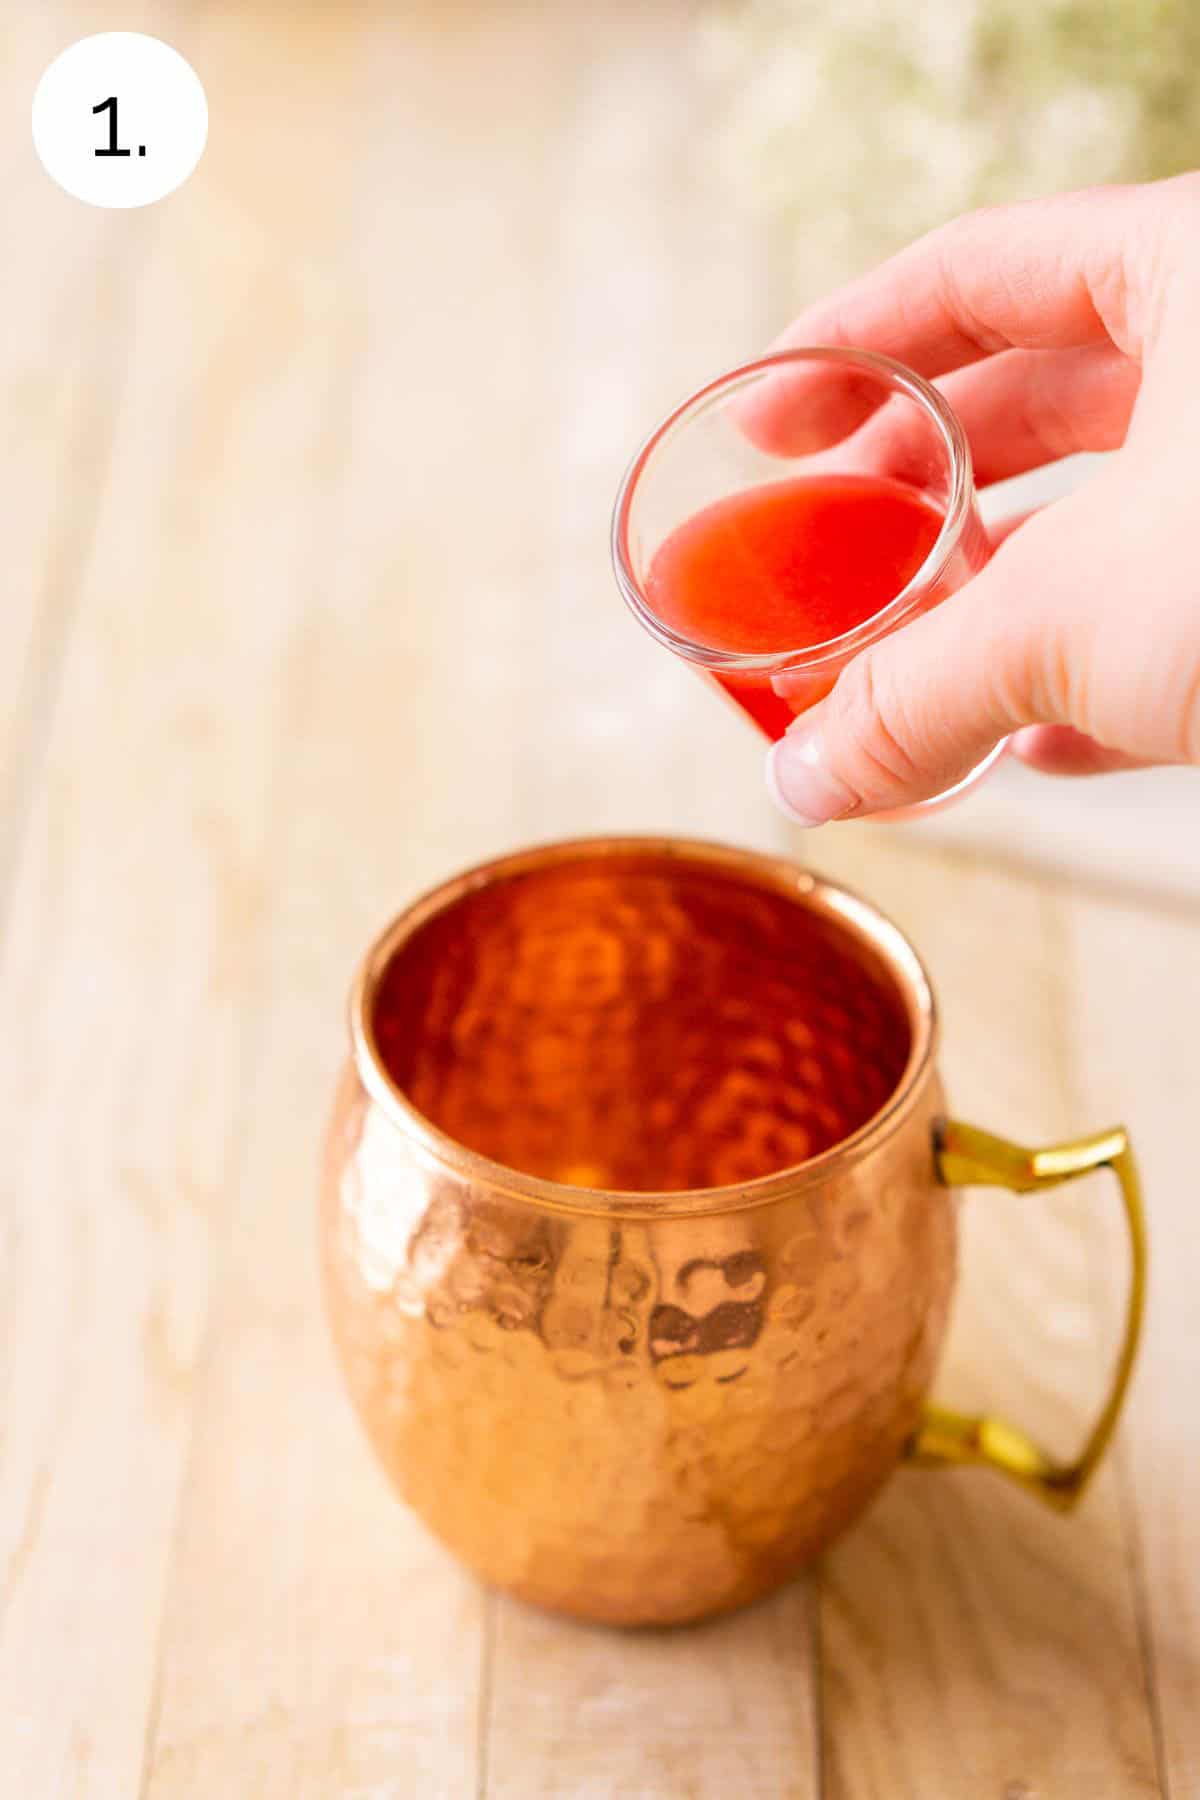 A hand pouring a shot glass full of the blood orange juice into the copper mug on a cream-colored wooden surface.